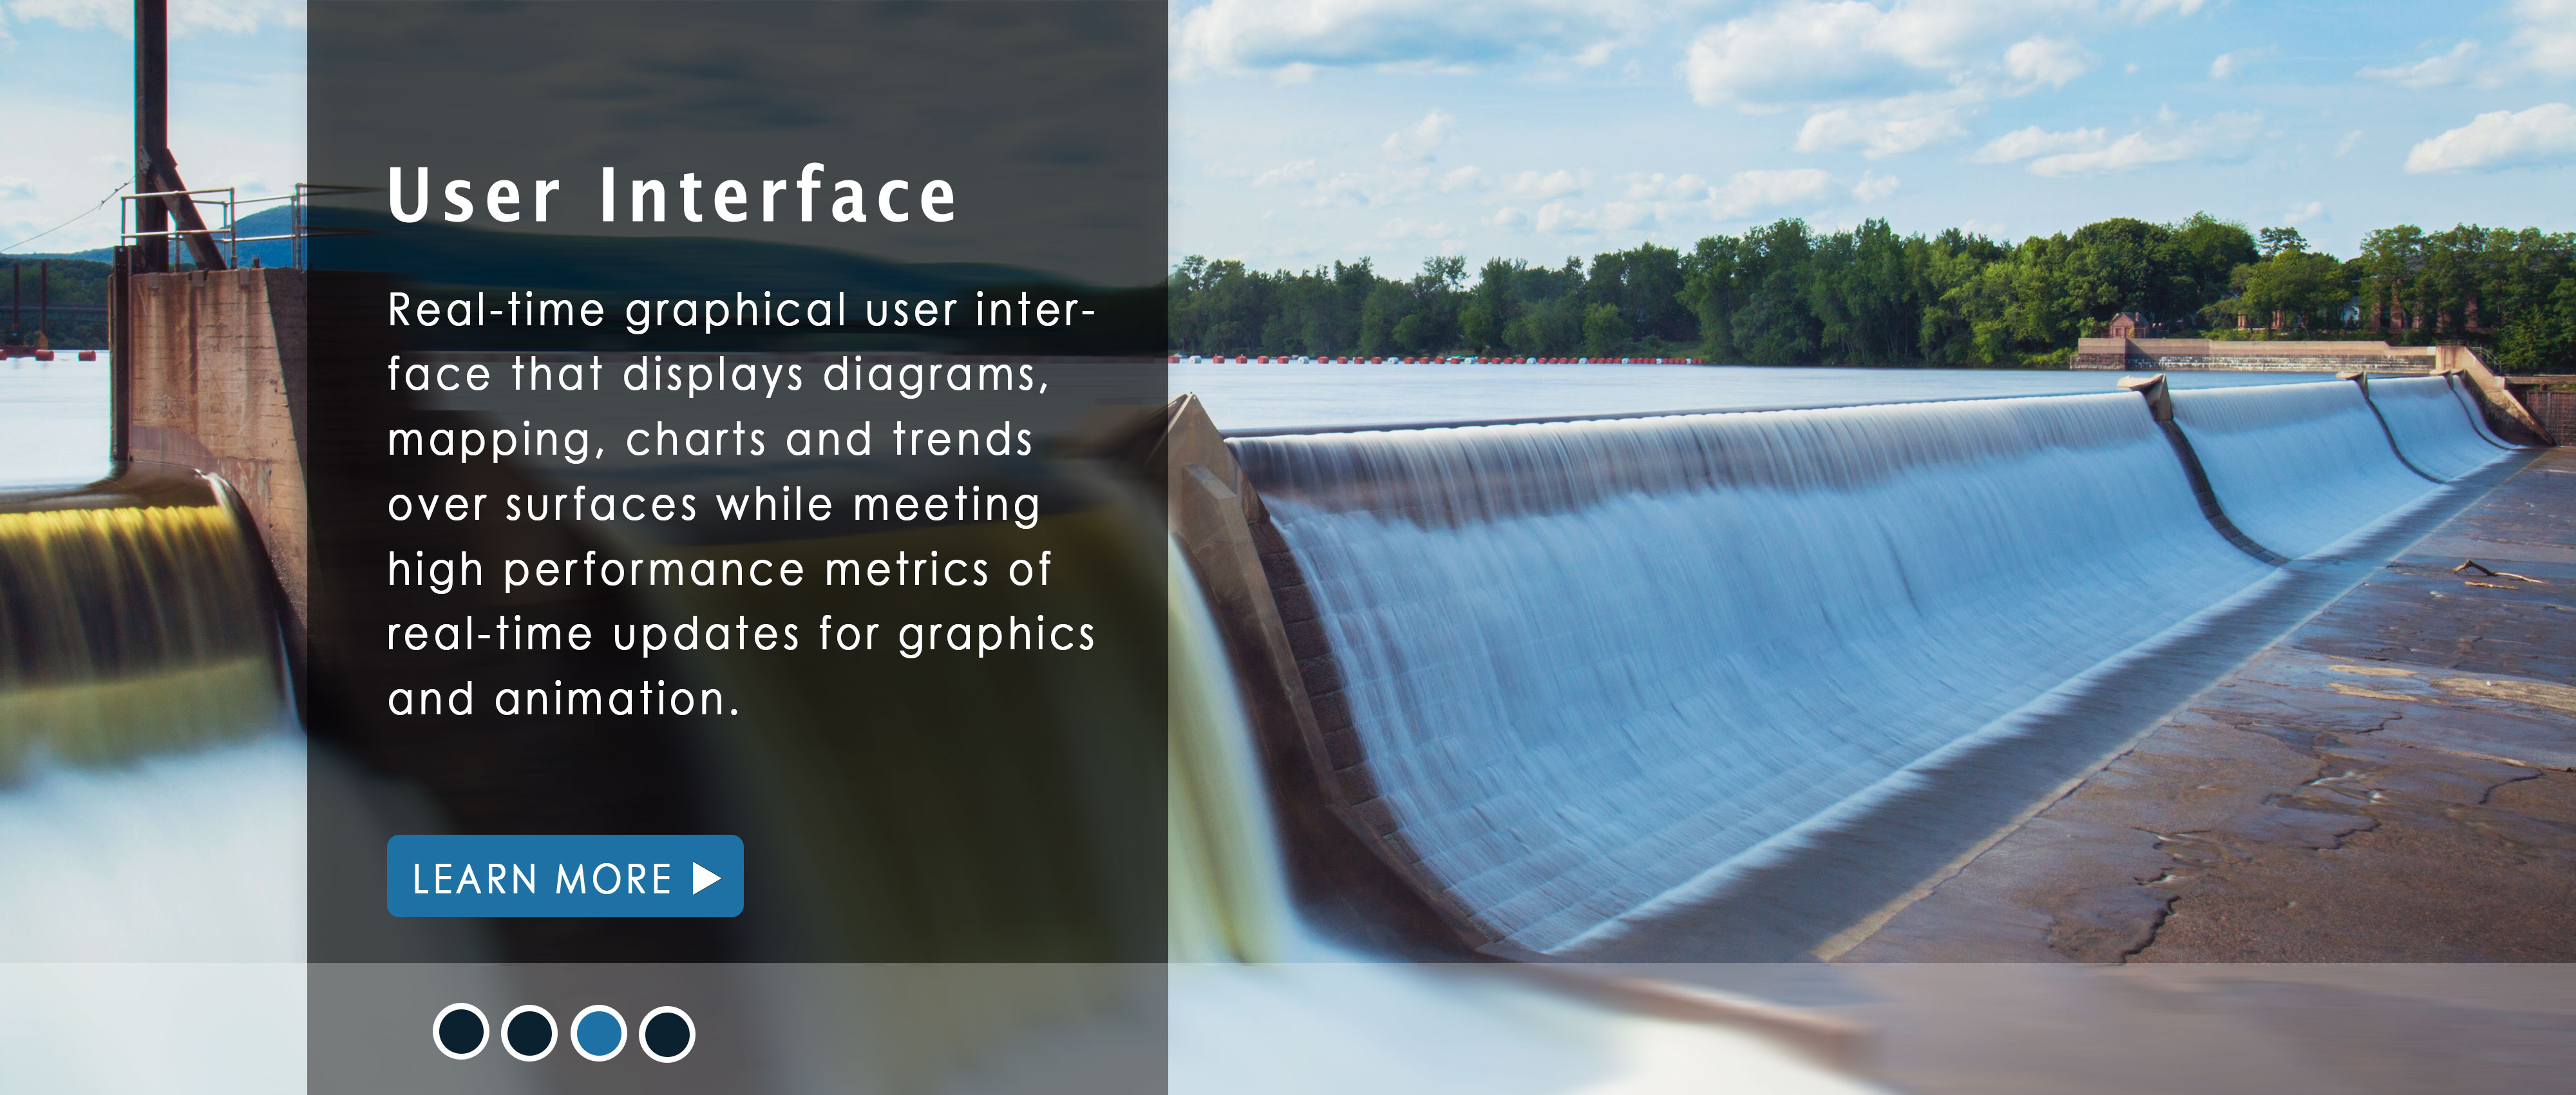 Real-time graphical user interface that displays diagrams,  mapping, charts and trends over surfaces while meeting high performance metrics of real-time updates for graphics and animation.